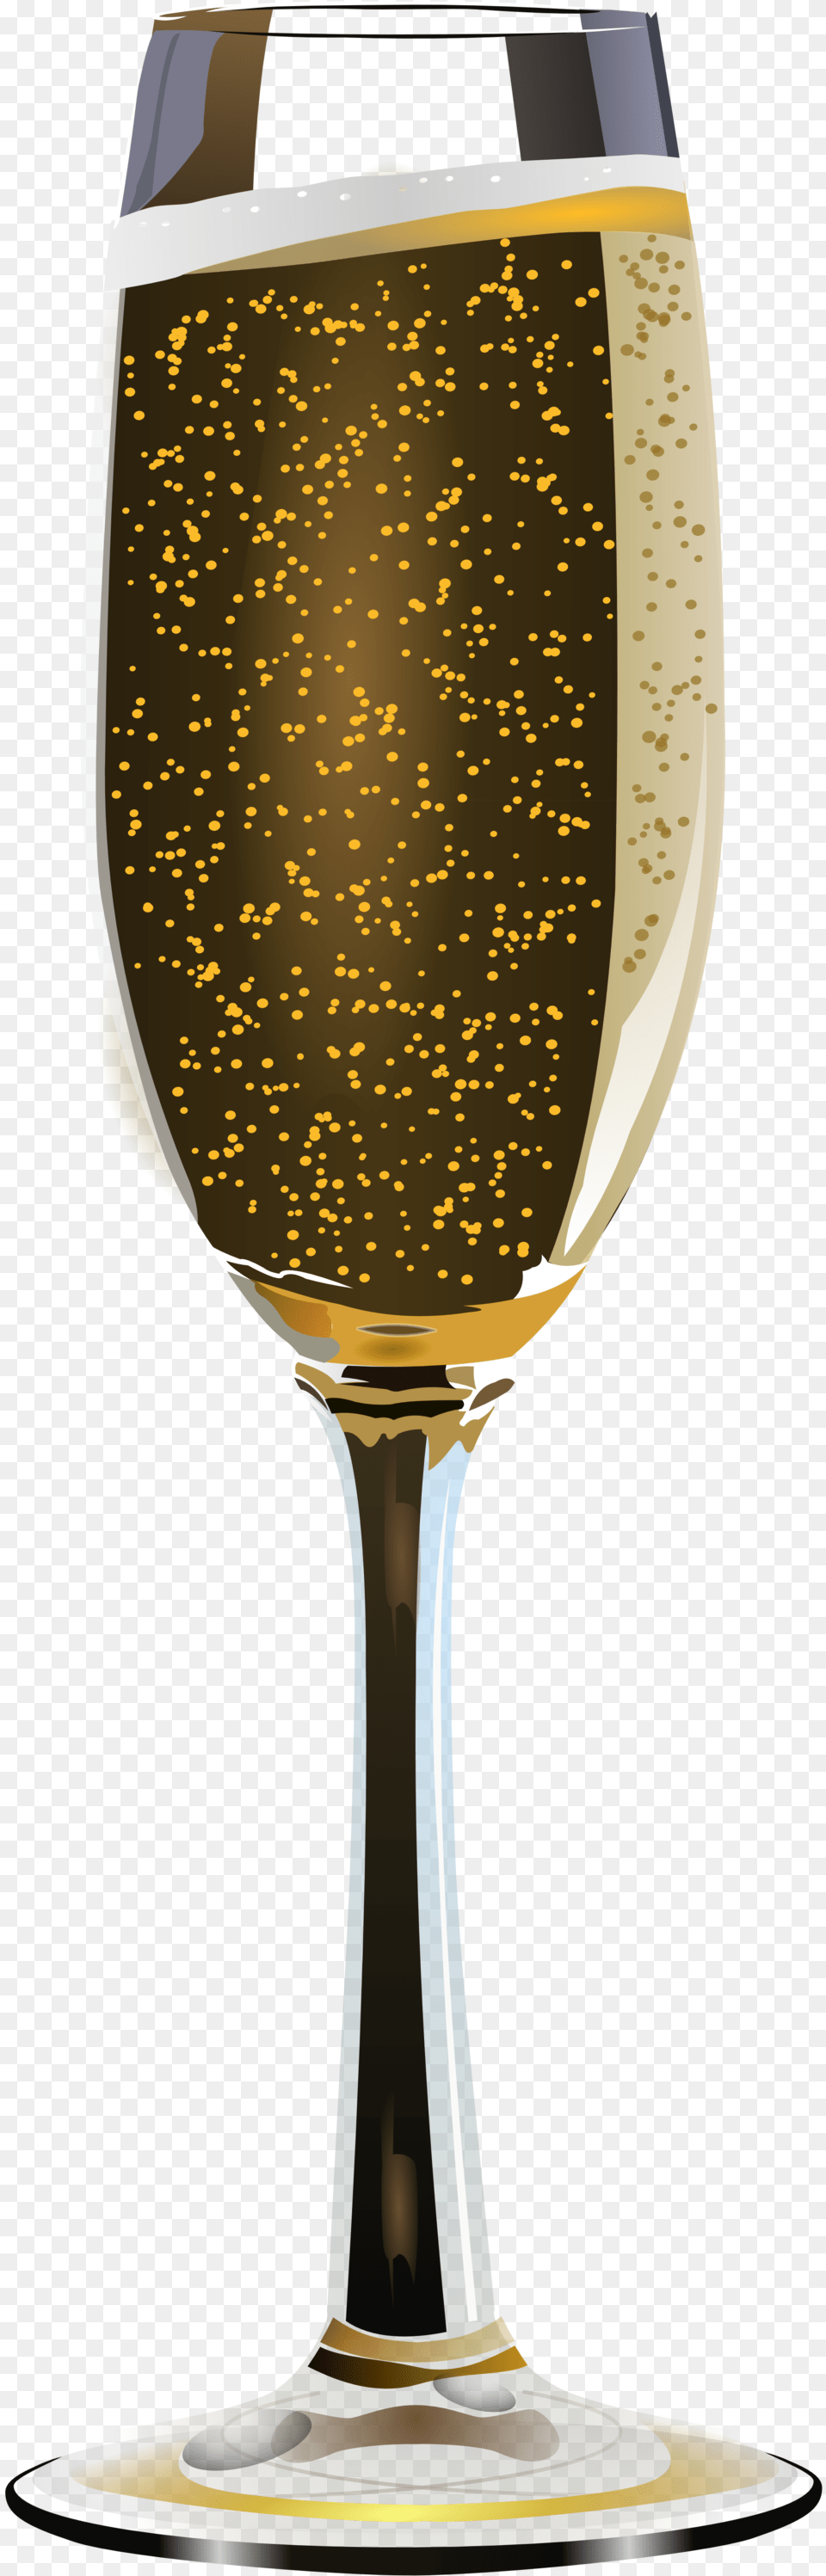 Gold Glitter Champagne Glass Clipart, Alcohol, Beverage, Liquor, Wine Png Image